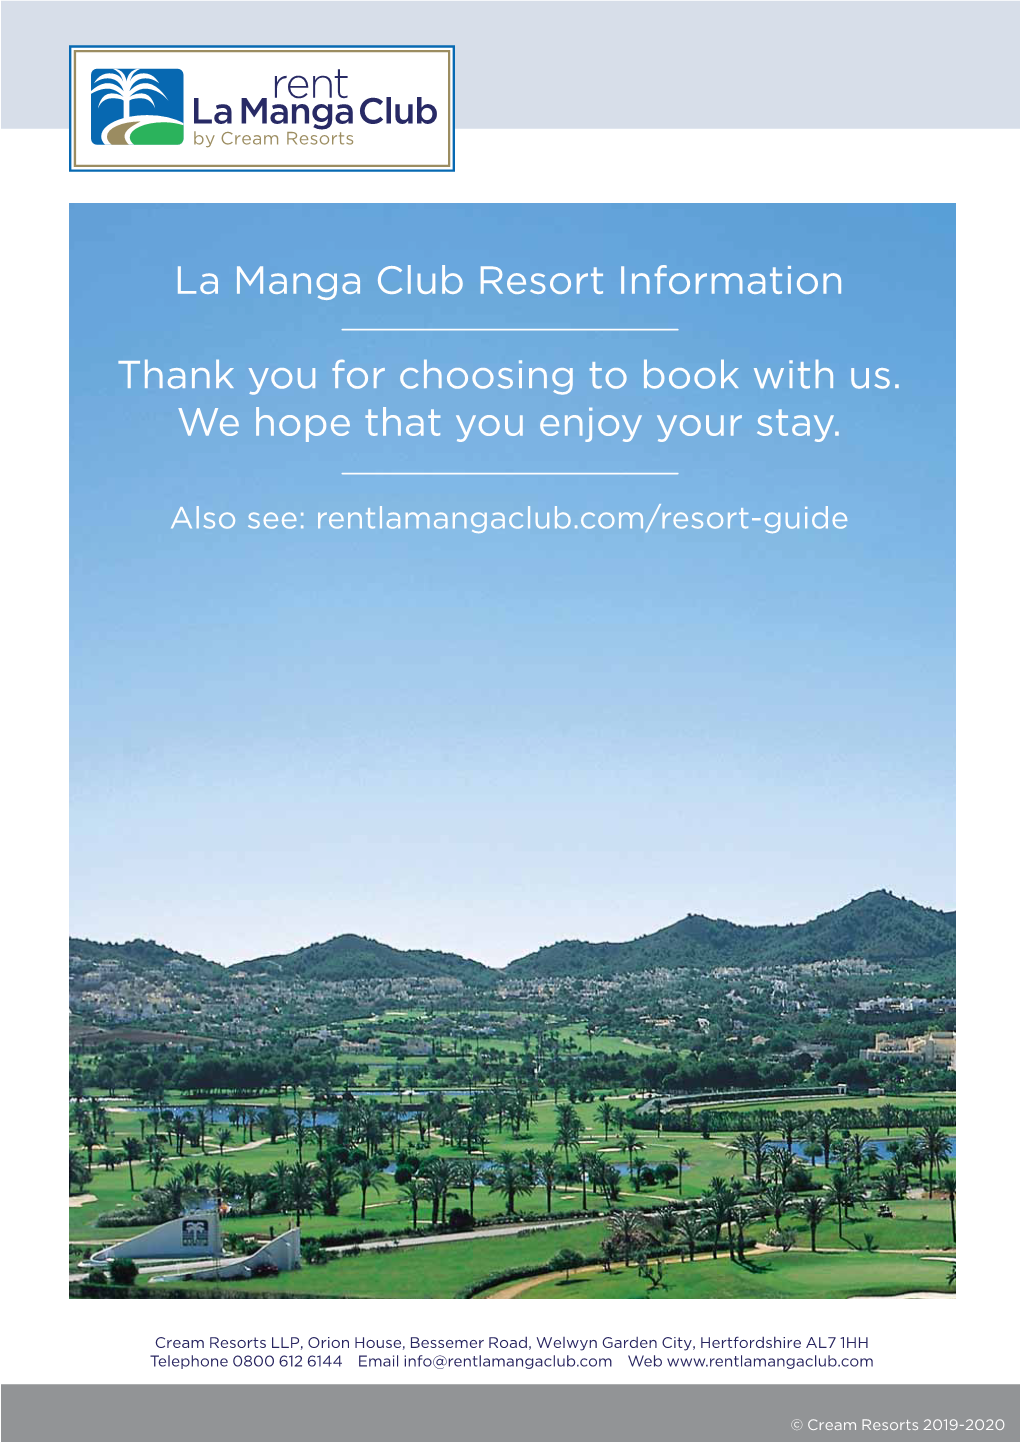 La Manga Club Resort Information Thank You for Choosing to Book With